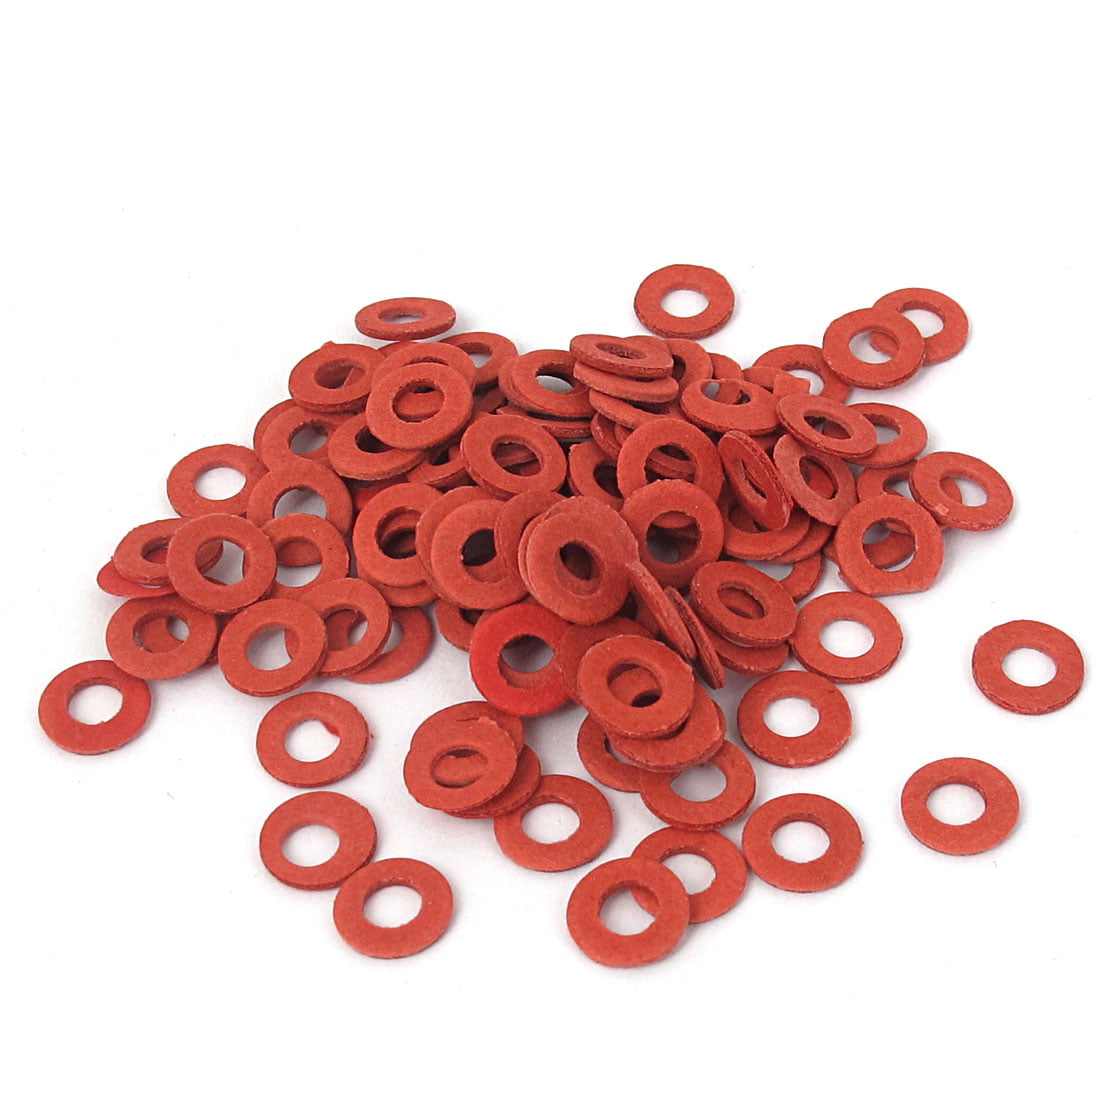 100 M2.5 6mm Insulating Fiber Washers Insulating Washers Spacer Red Paper Washer 